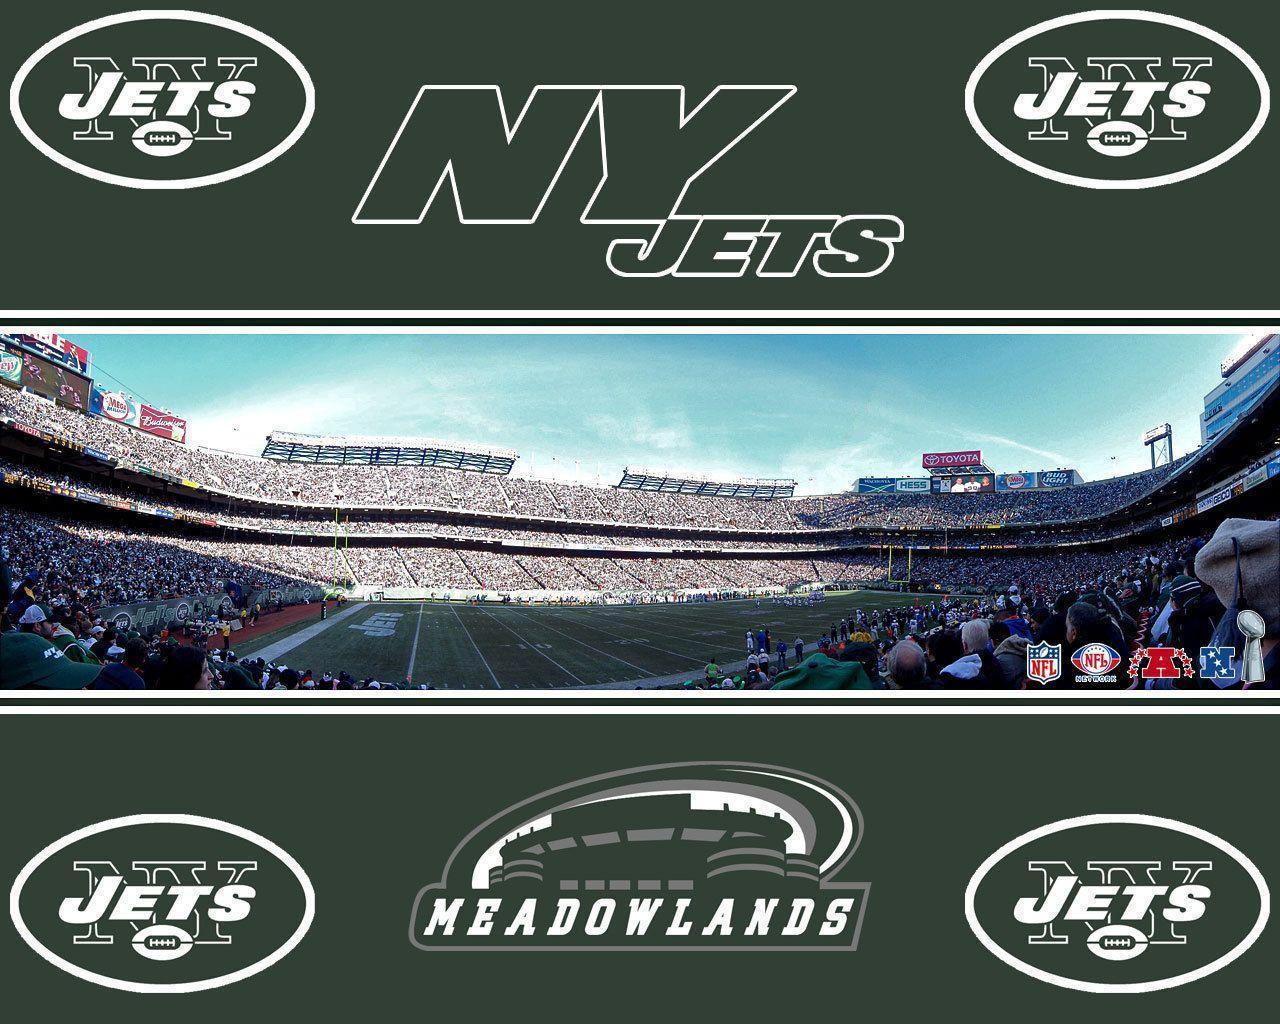 New York Jets image NY Jets HD wallpaper and background photo